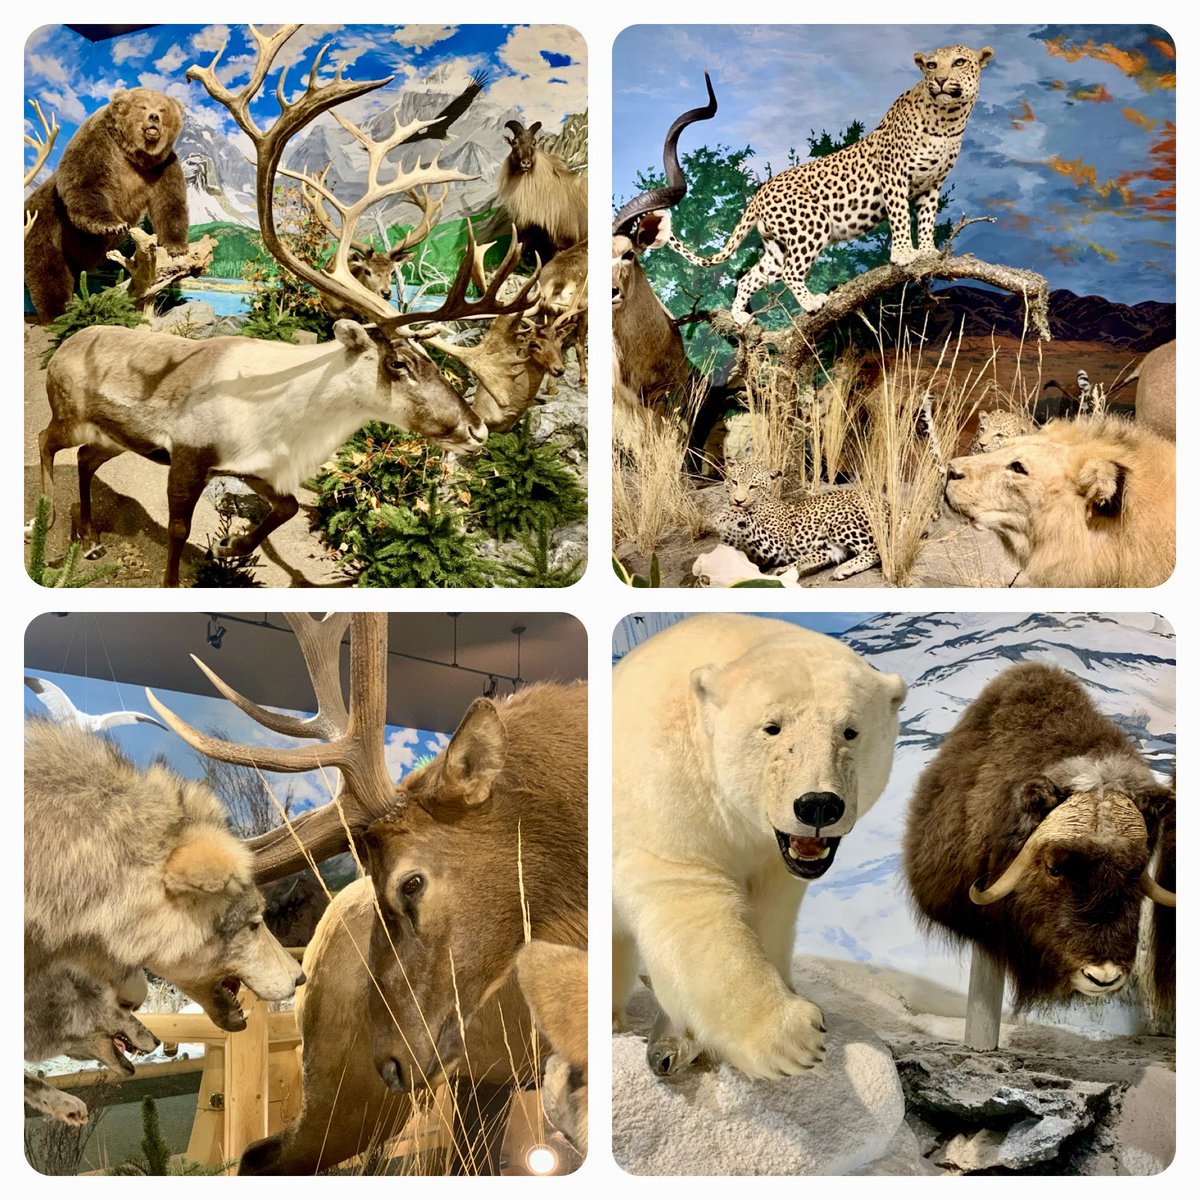 Who would have thought that Sundre, Alberta, population 2672, would host such a rich and impressive museum. Highly, highly recommended. And we didn’t even get to visit the outdoor section that only opens for summer. @sundremuseum